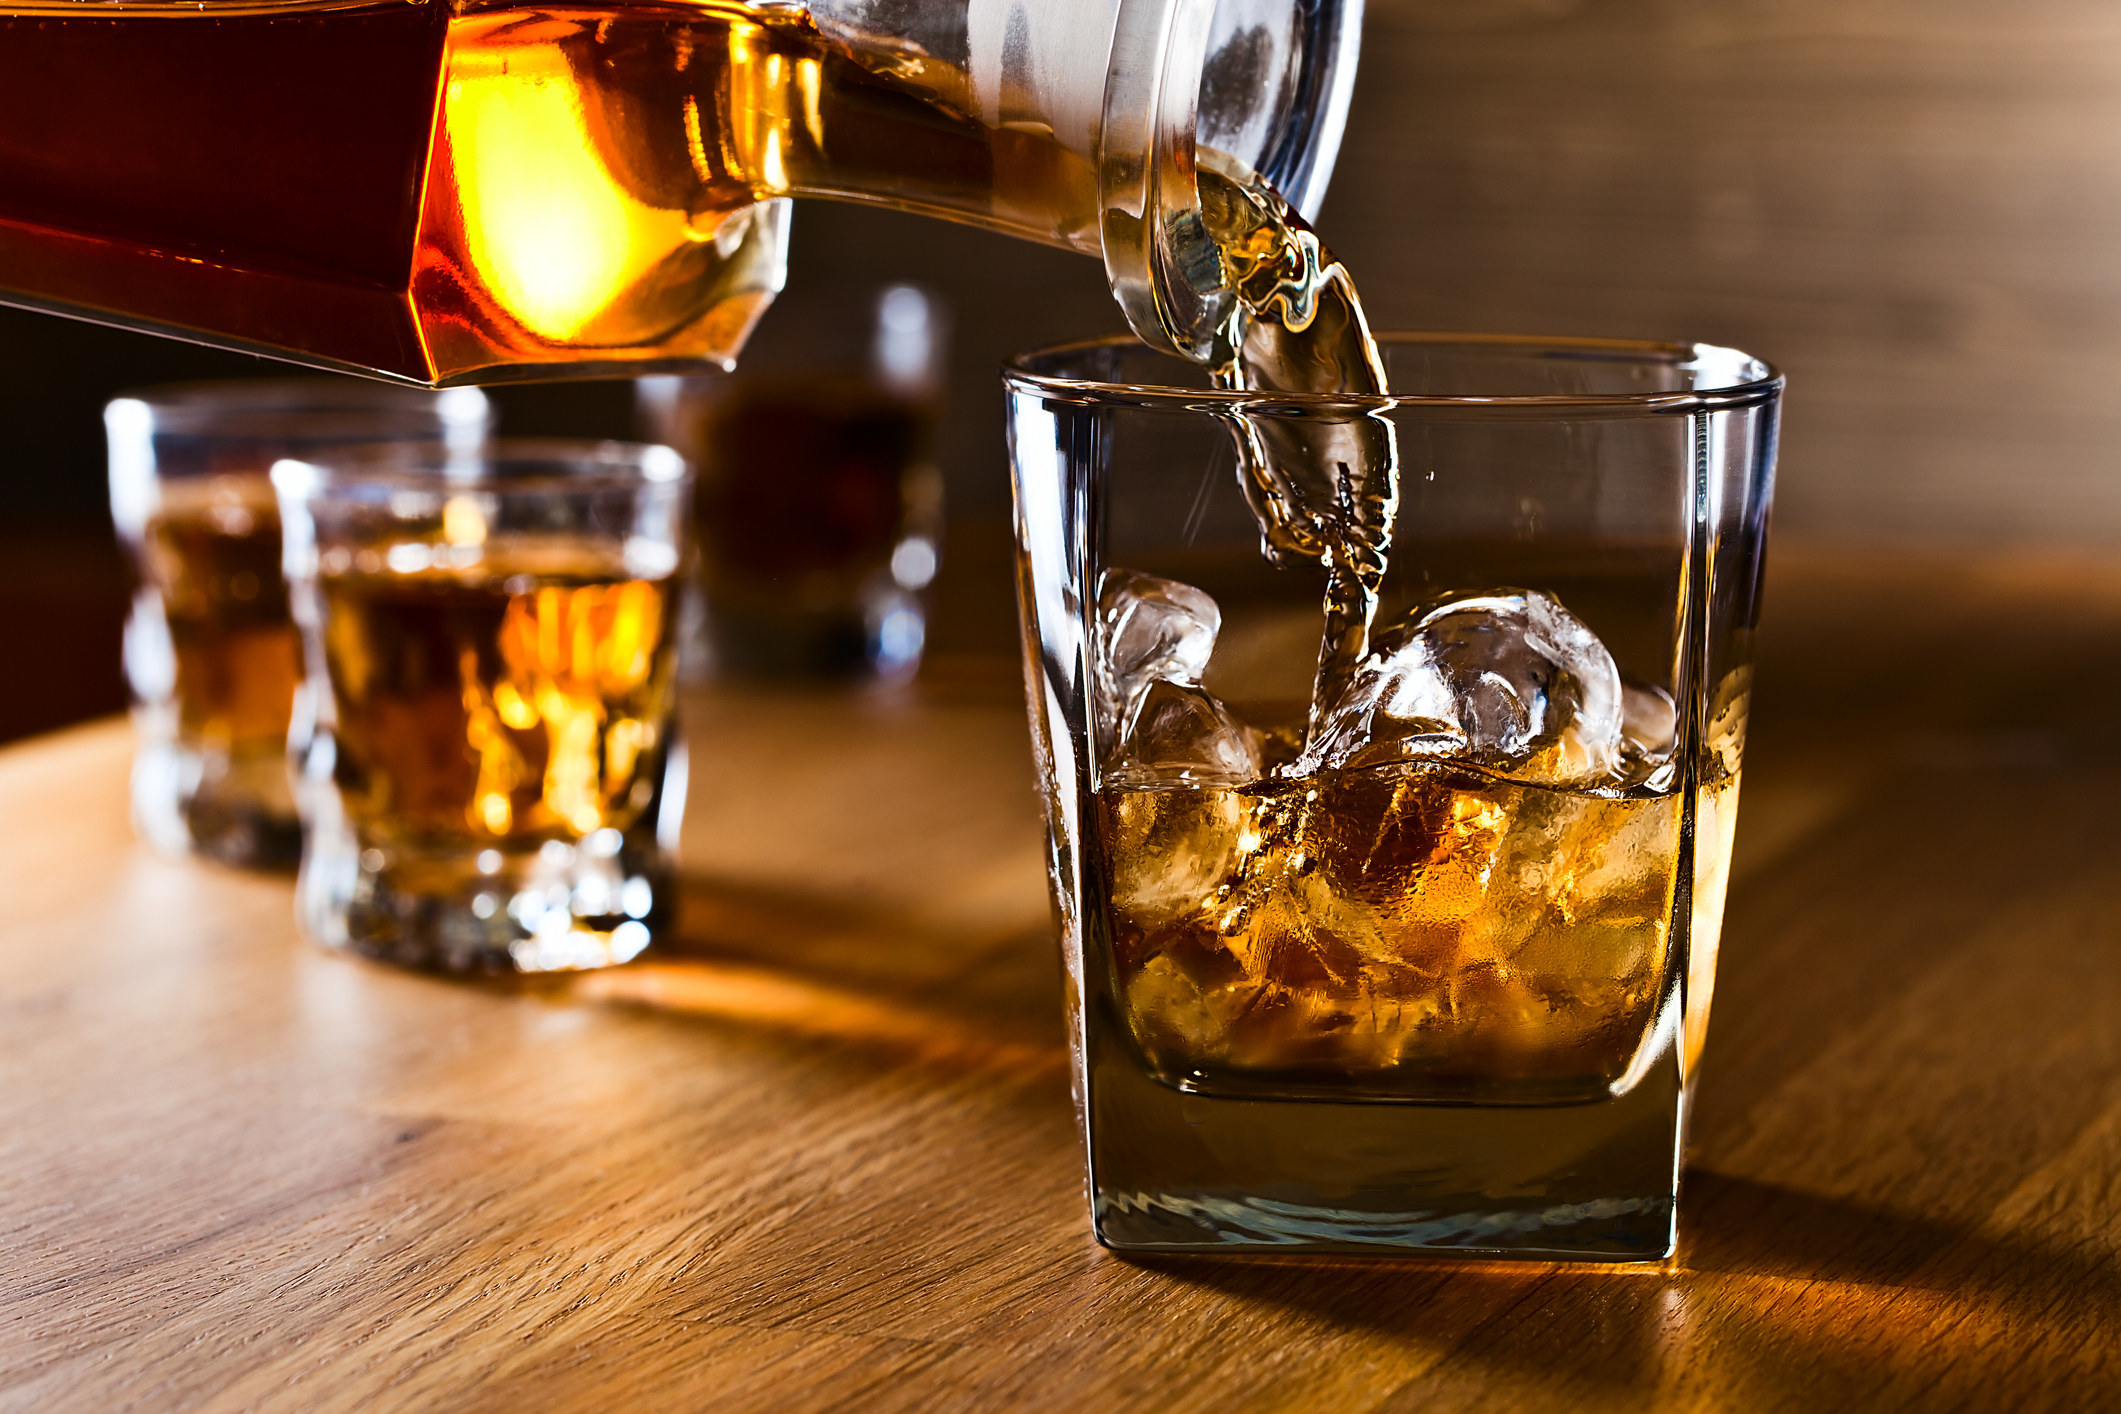 A stock image of whiskey and natural ice on old wooden table